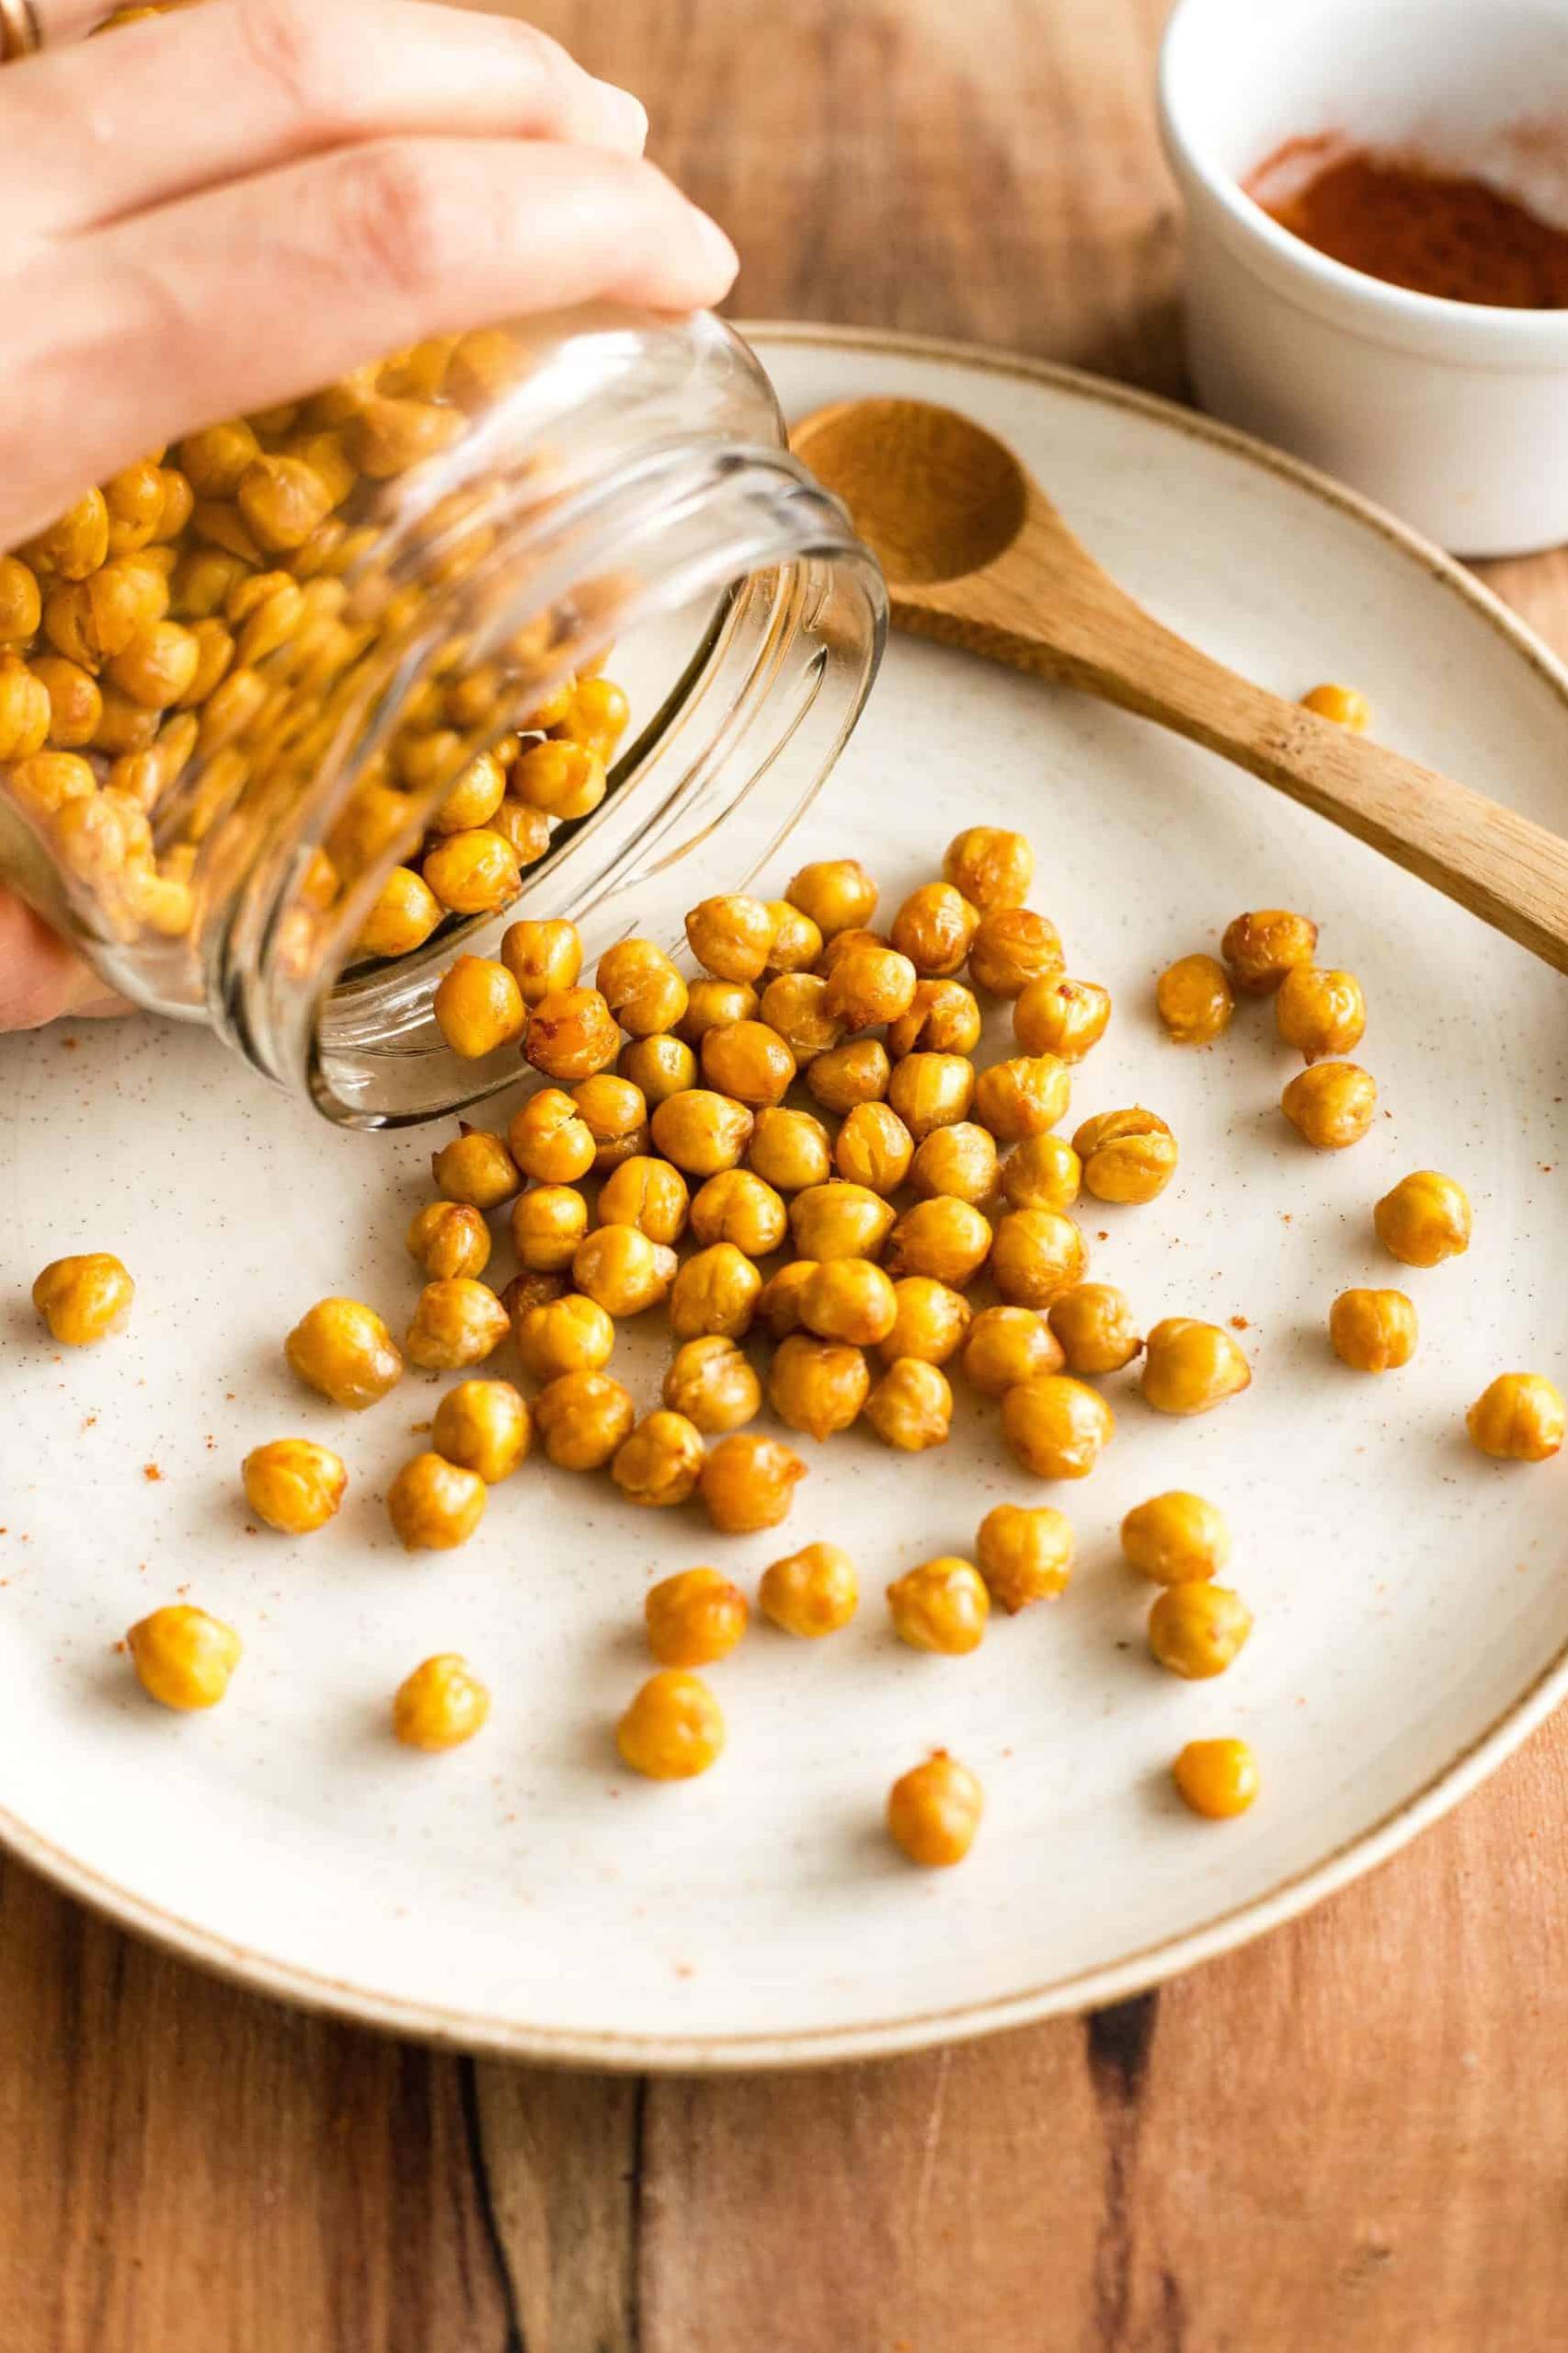  Say goodbye to boring snacks and hello to the perfect balance of salty and sweet with these baked chickpeas.